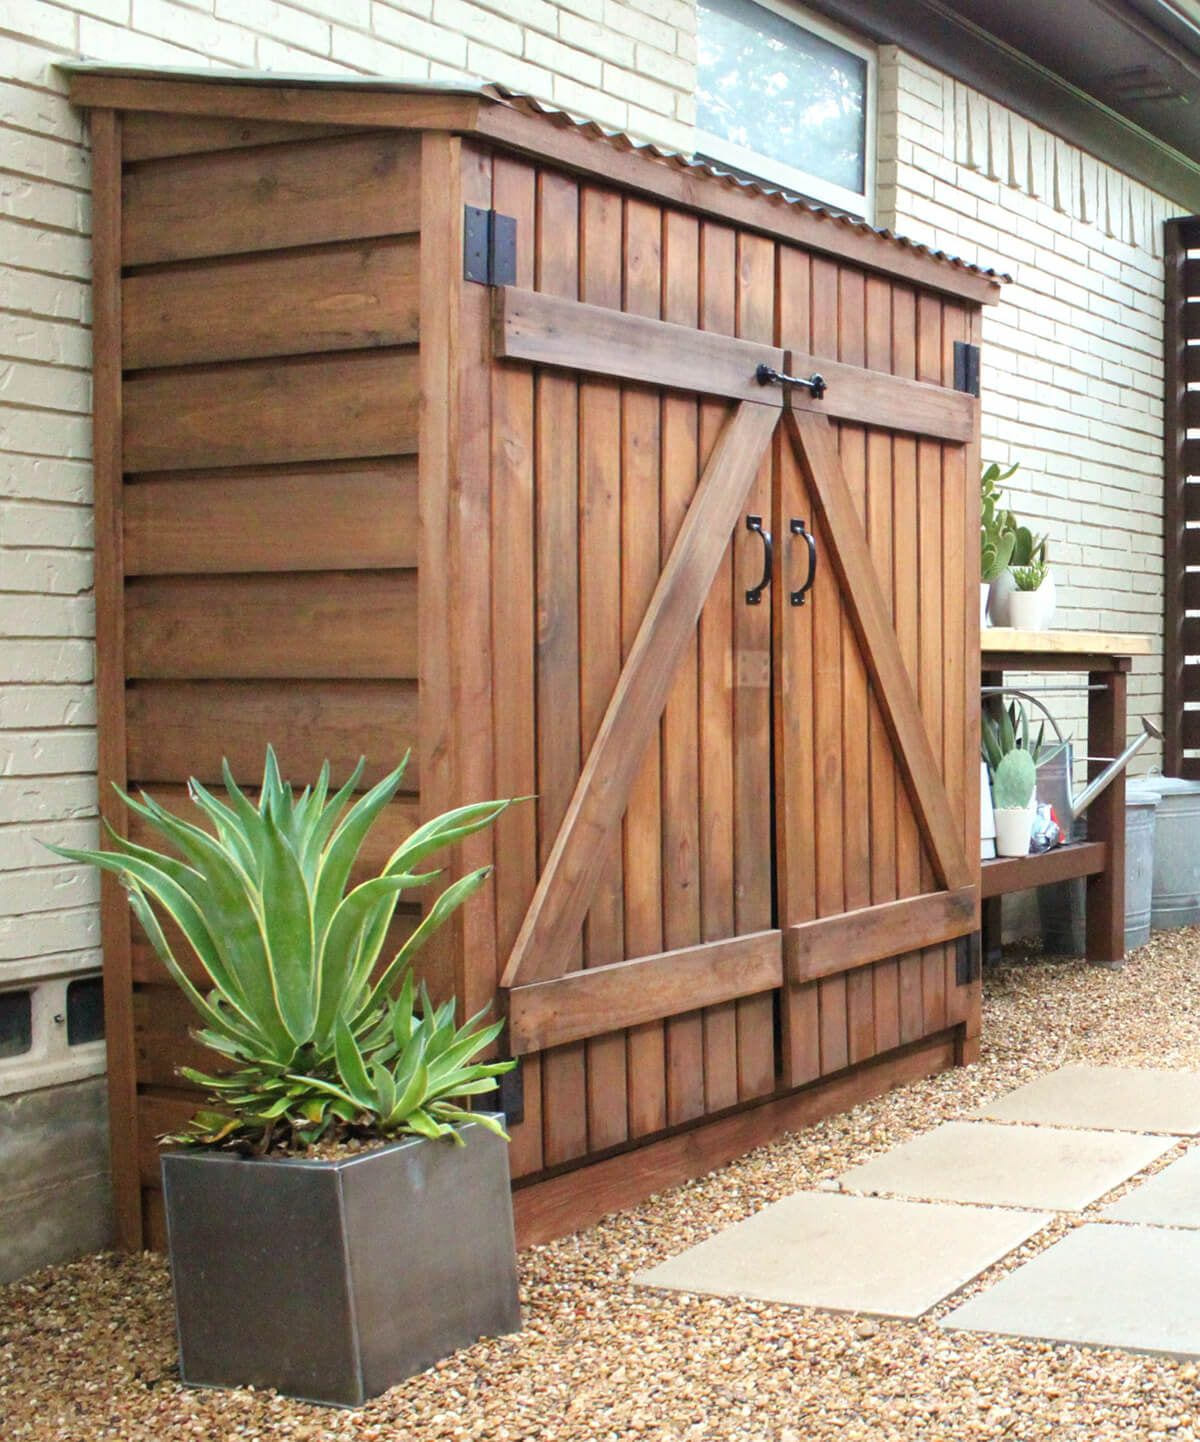 Simphome.com unique small storage shed ideas for your garden how my garden with small garden shed ideas